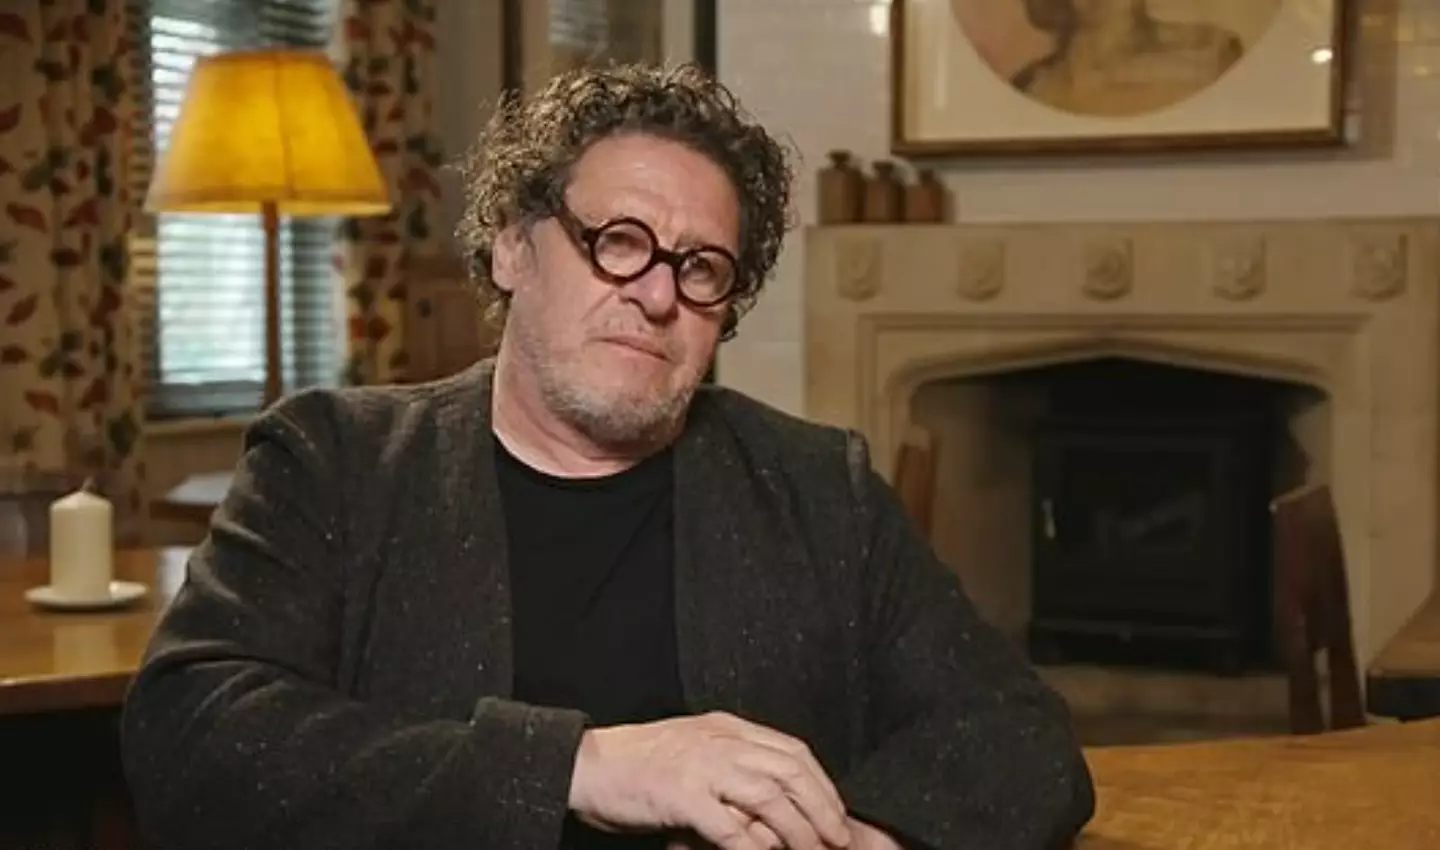 Marco Pierre White was also included in the TV special.